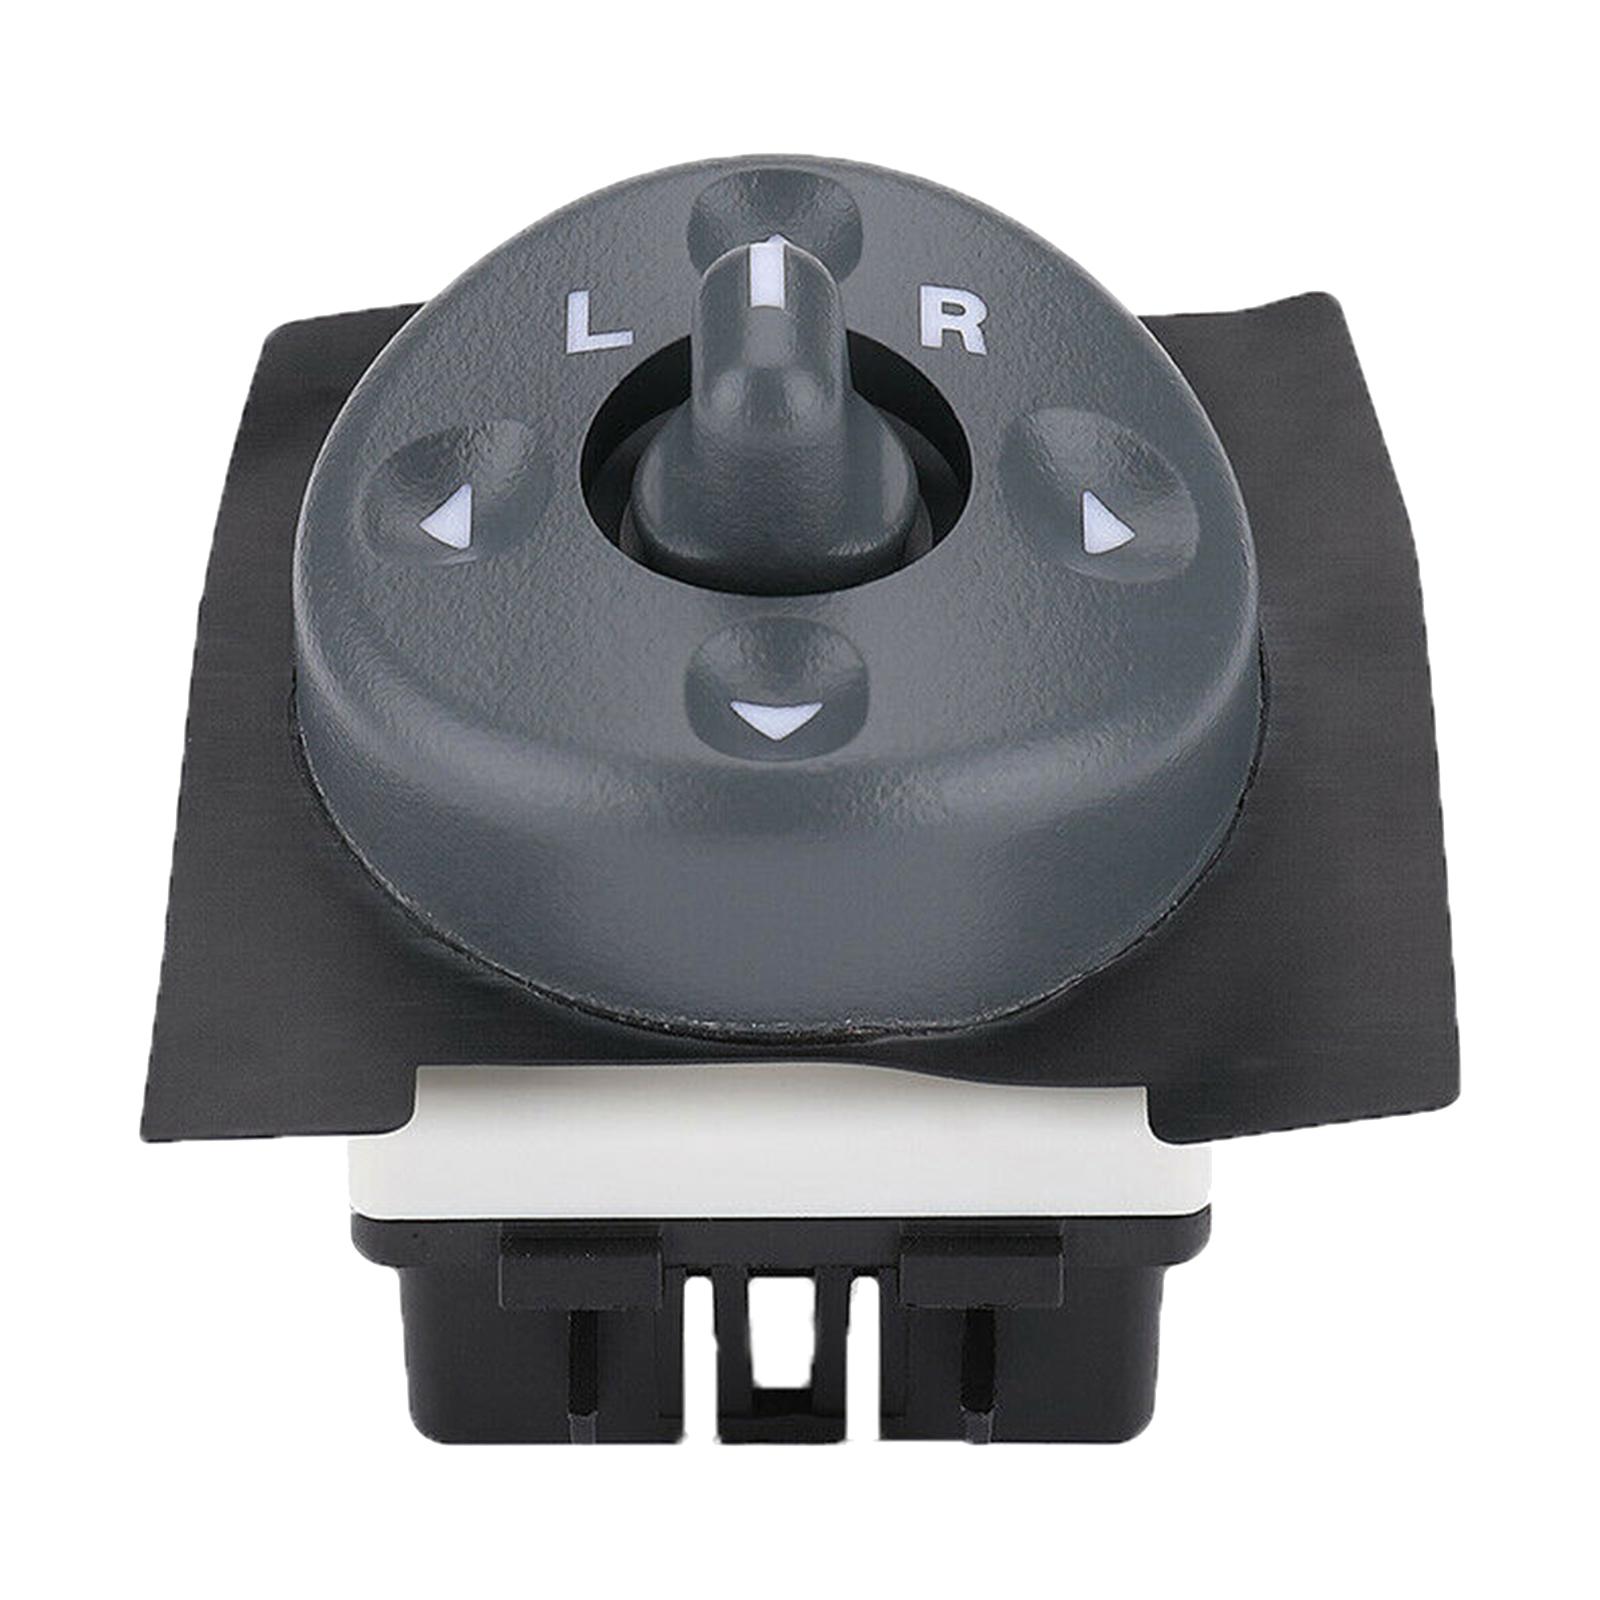 15009690 Car Accessories Replaces Durable Power Mirror Switch for Chevy